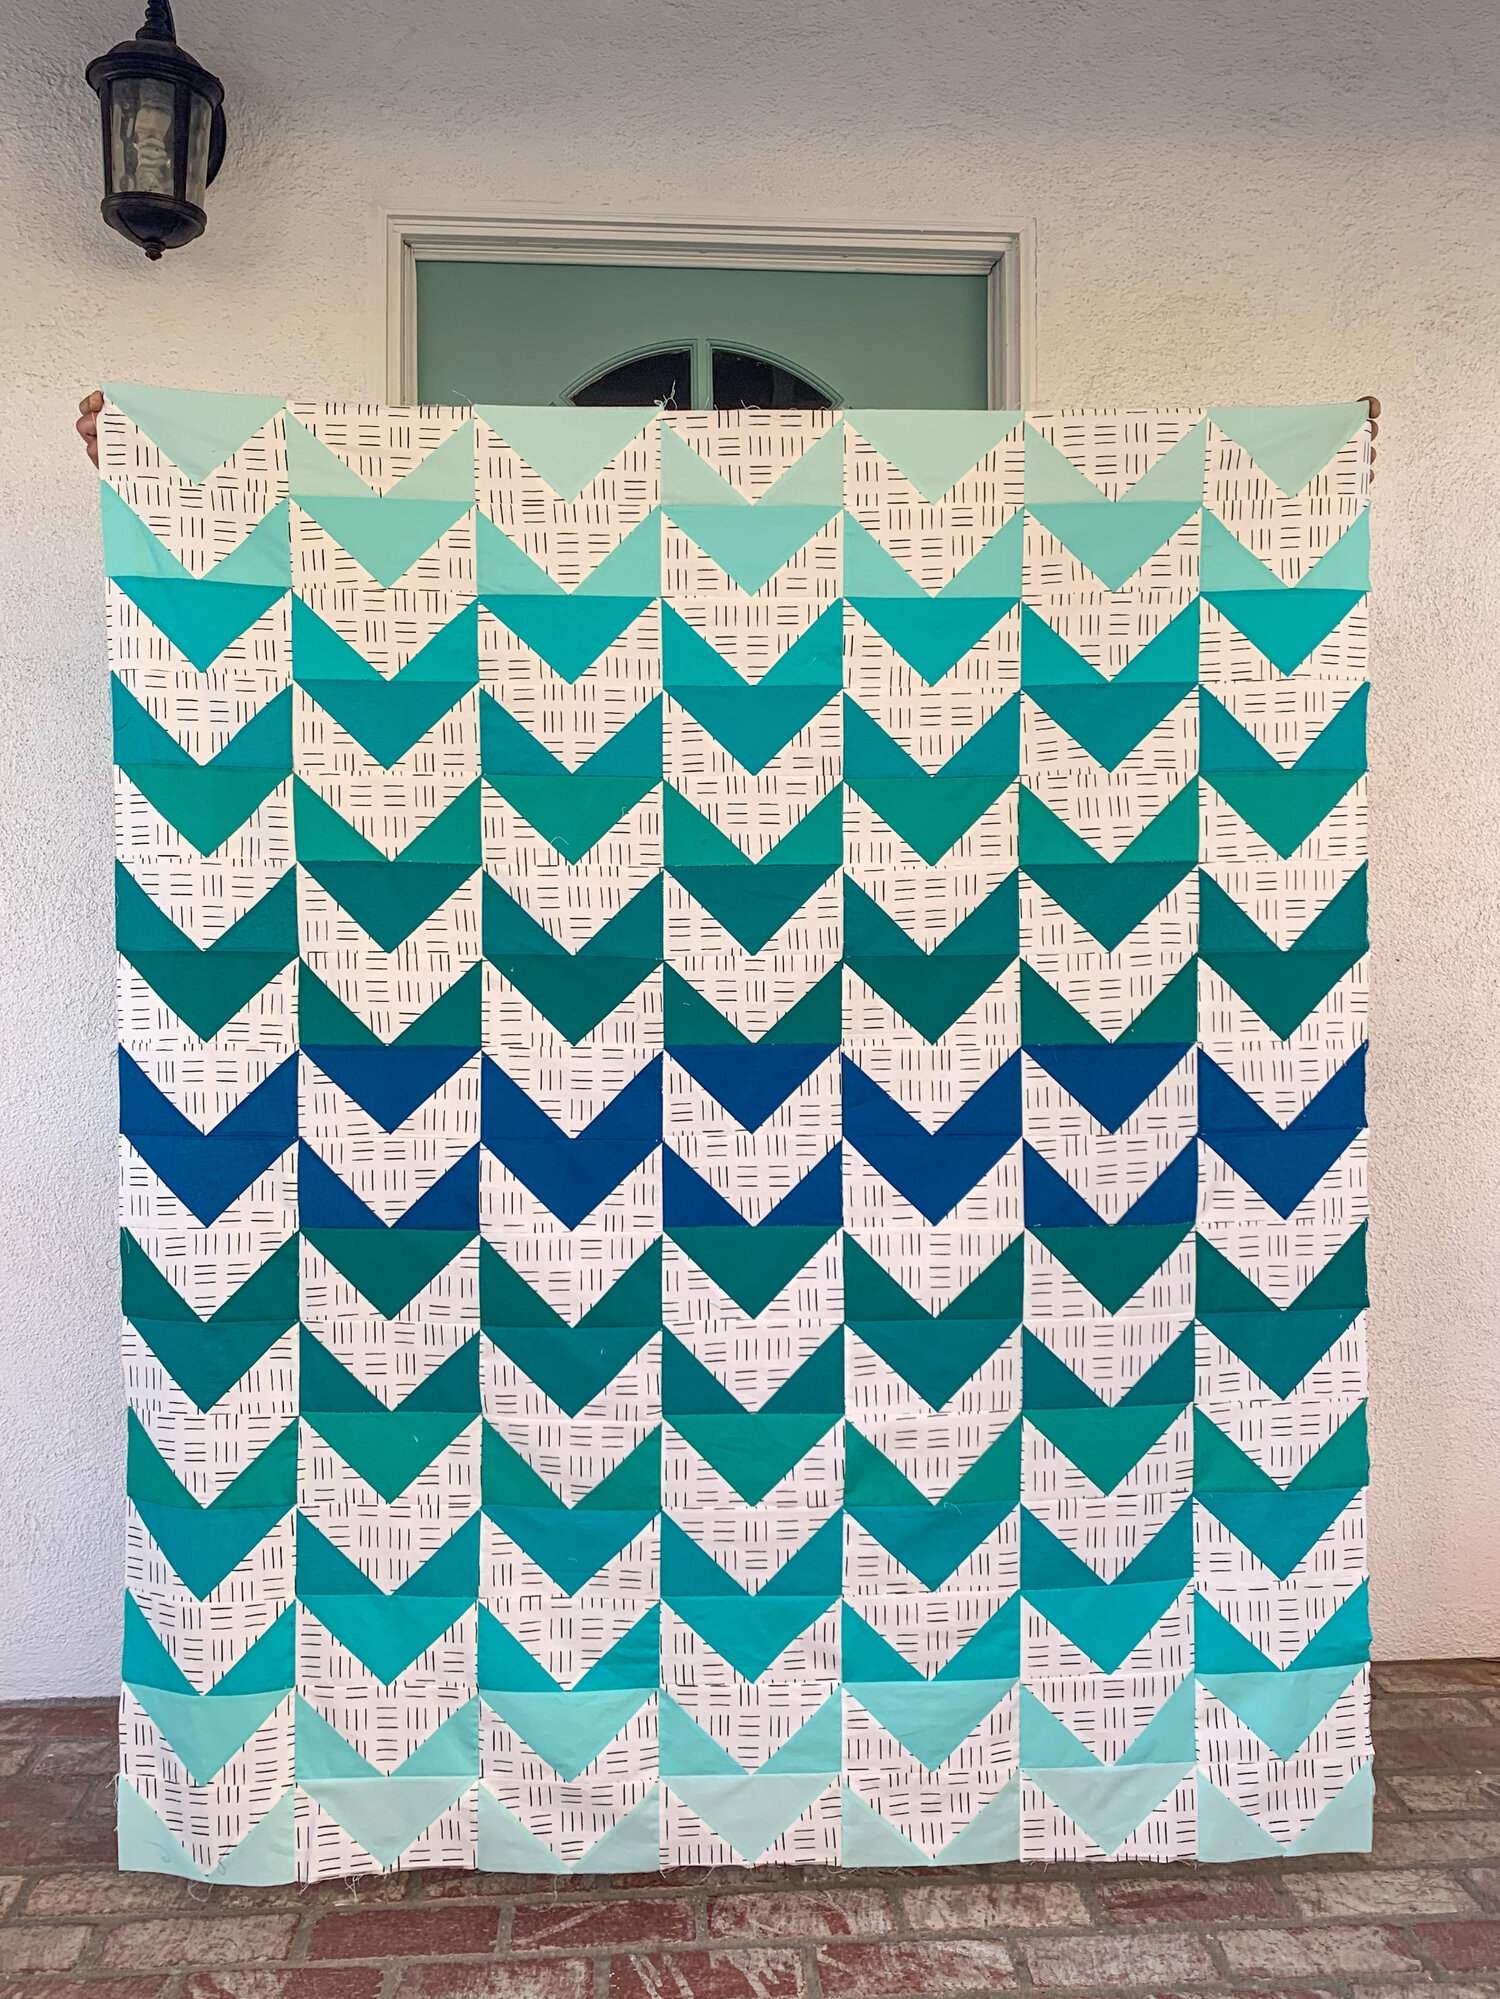 I absolutely adore Amy’s unique quilt! She used 1/2 the number of main fabrics and mirrored the colors in her quilt, pairing the gorgeous ombre solids with a simple, modern print for the background fabric. Amy has so many beautiful projects to browse through on her IG page @longlivehandmade.